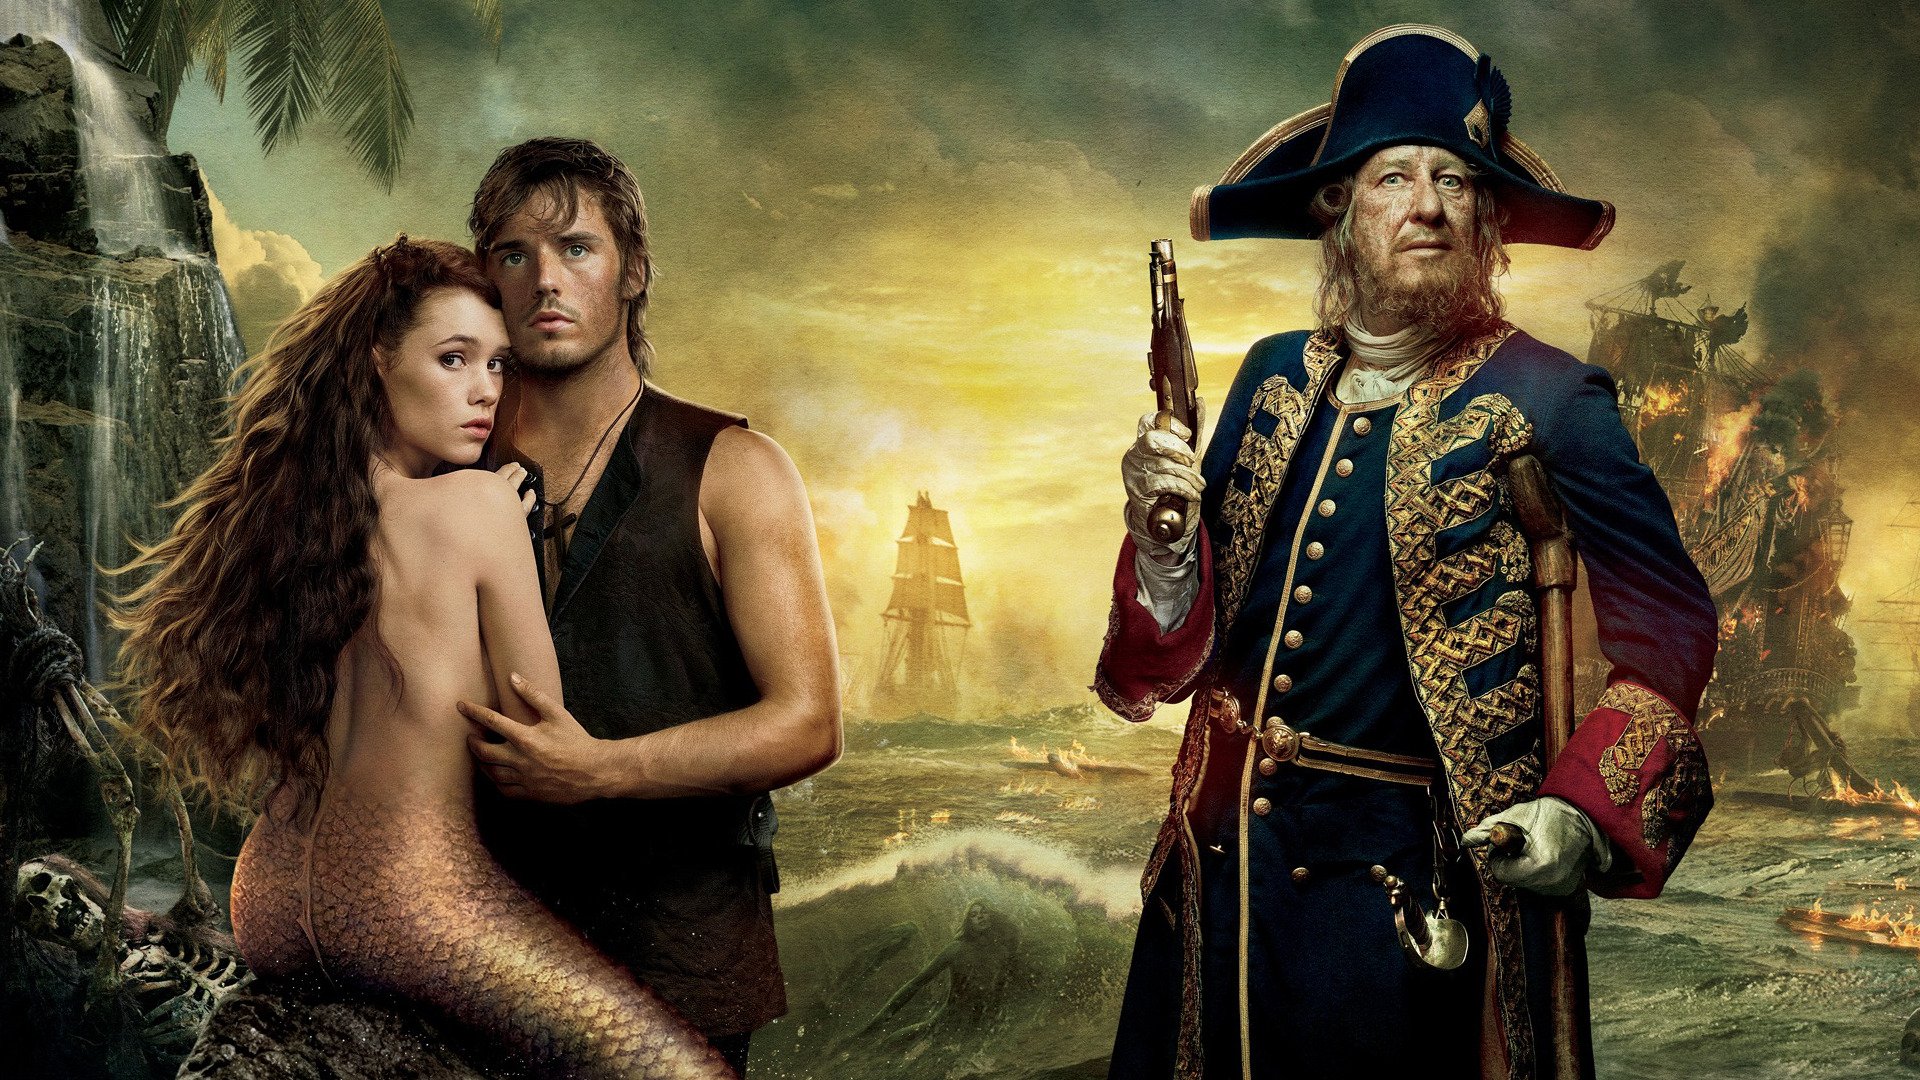 Download Mermaid Syrena (Pirates Of The Caribbean) Philip (Pirates Of The Caribbean) Sam Claflin Astrid Bergès-Frisbey Geoffrey Rush Hector Barbossa Movie Pirates Of The Caribbean: On Stranger Tides  HD Wallpaper